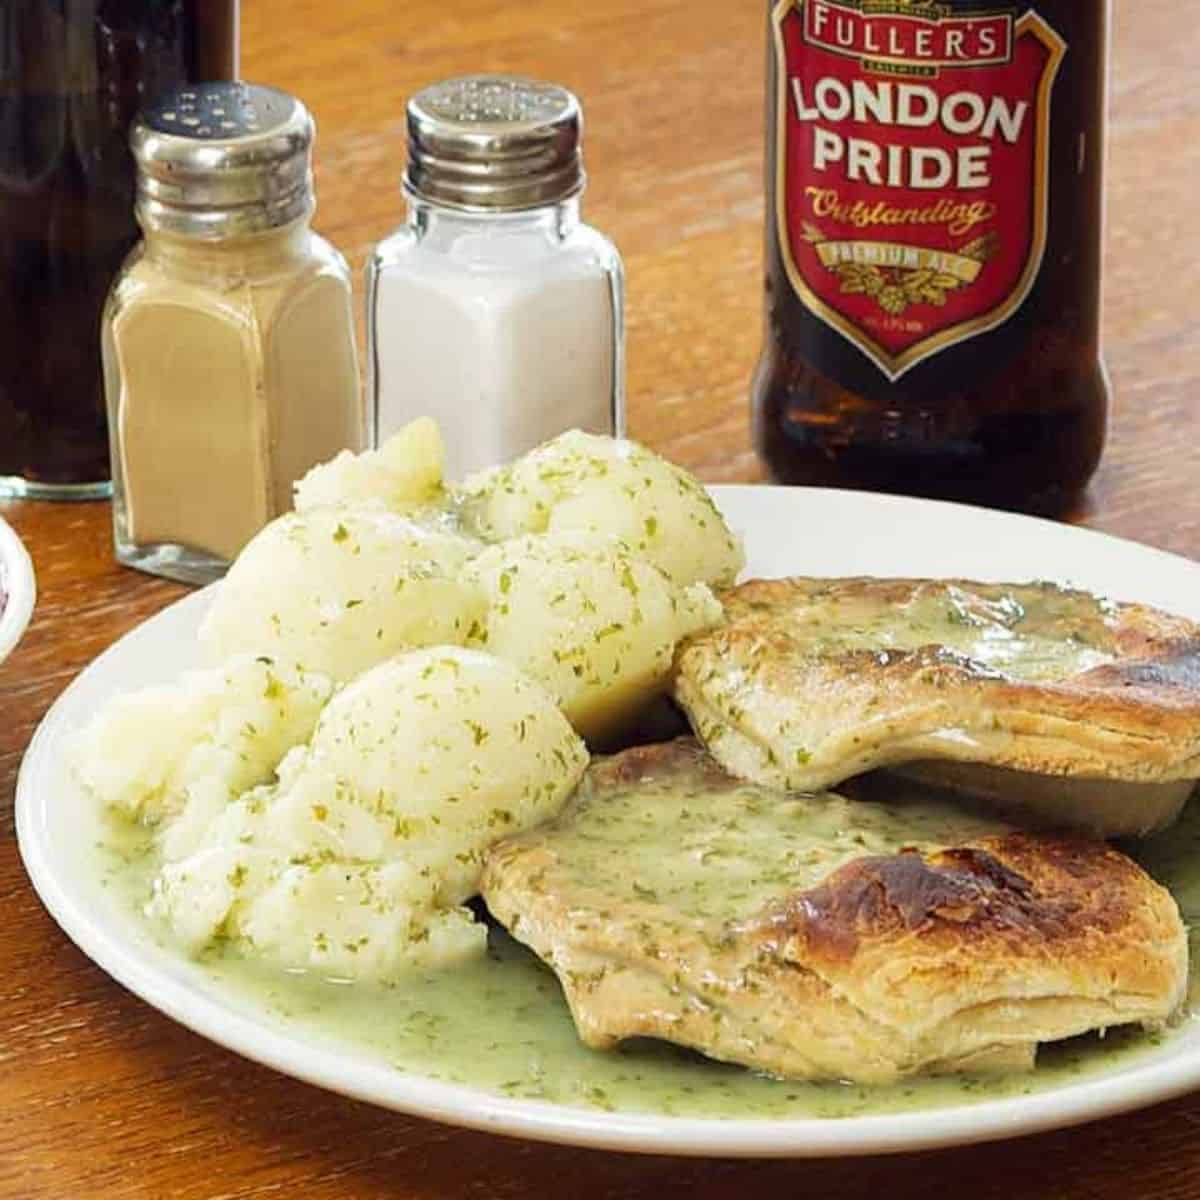 Classic pie and mash with jellied eel